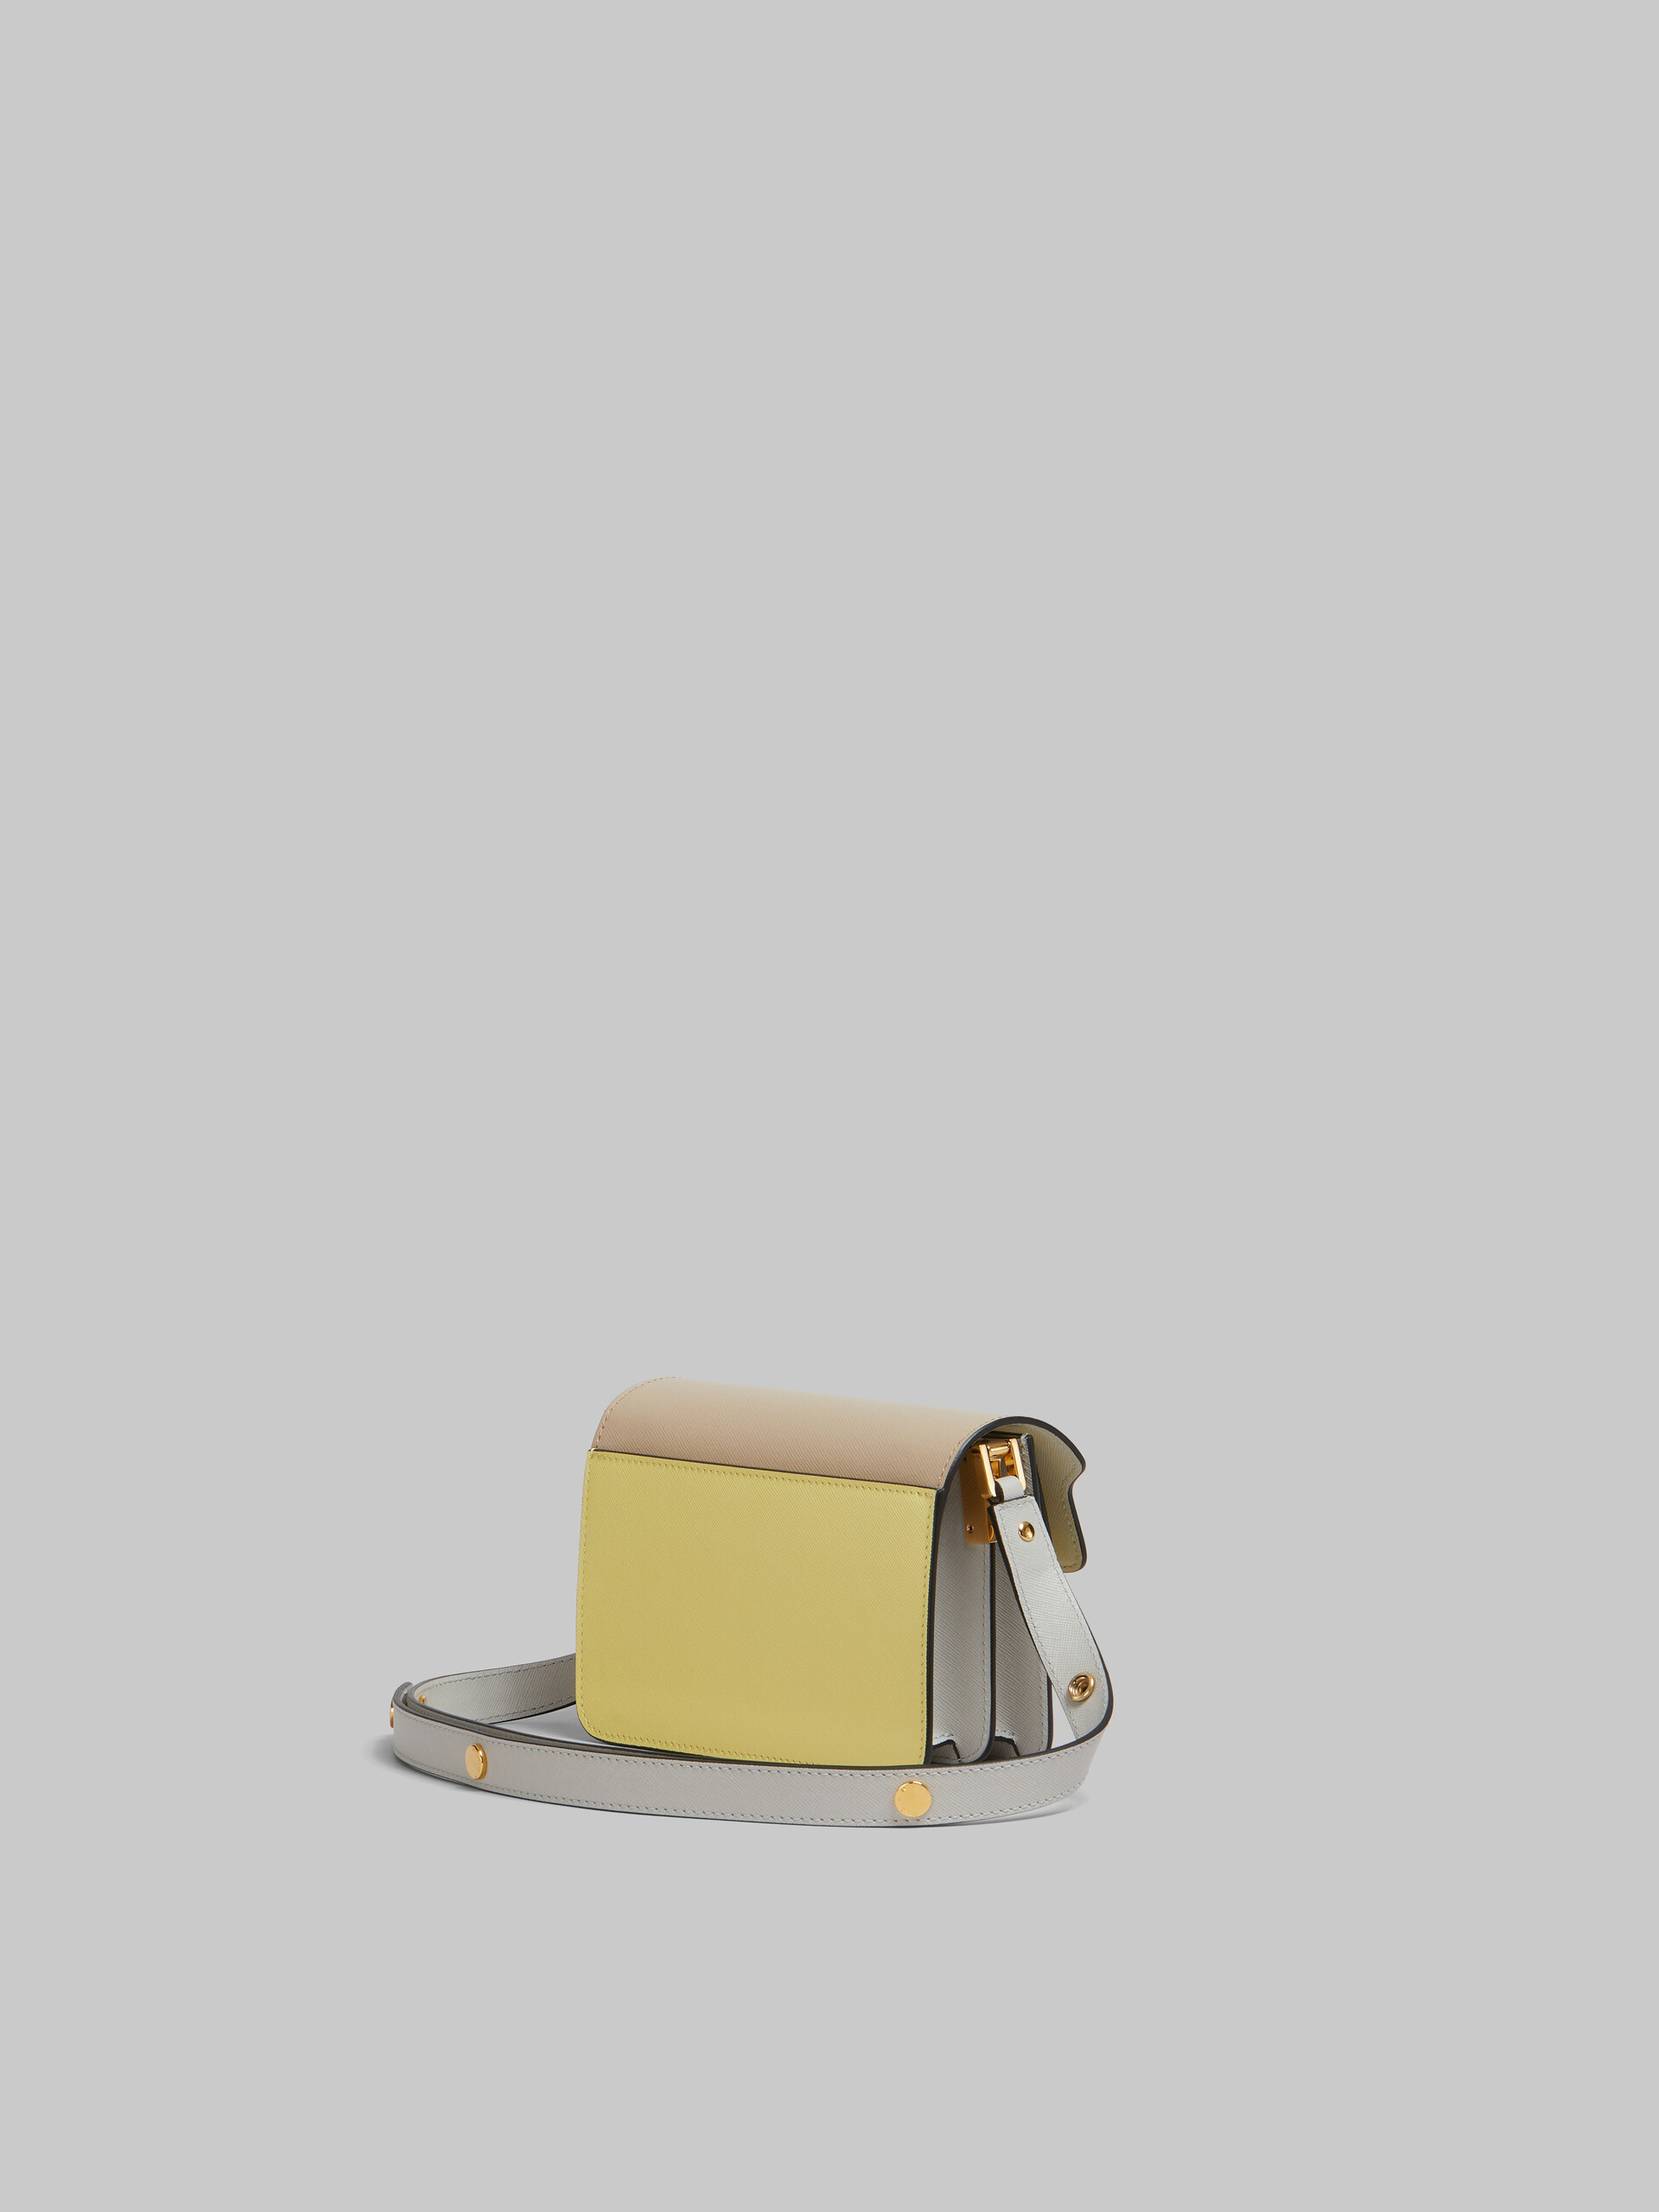 Tan yellow and grey saffiano leather mini Trunk bag - Shoulder Bags - Image 3